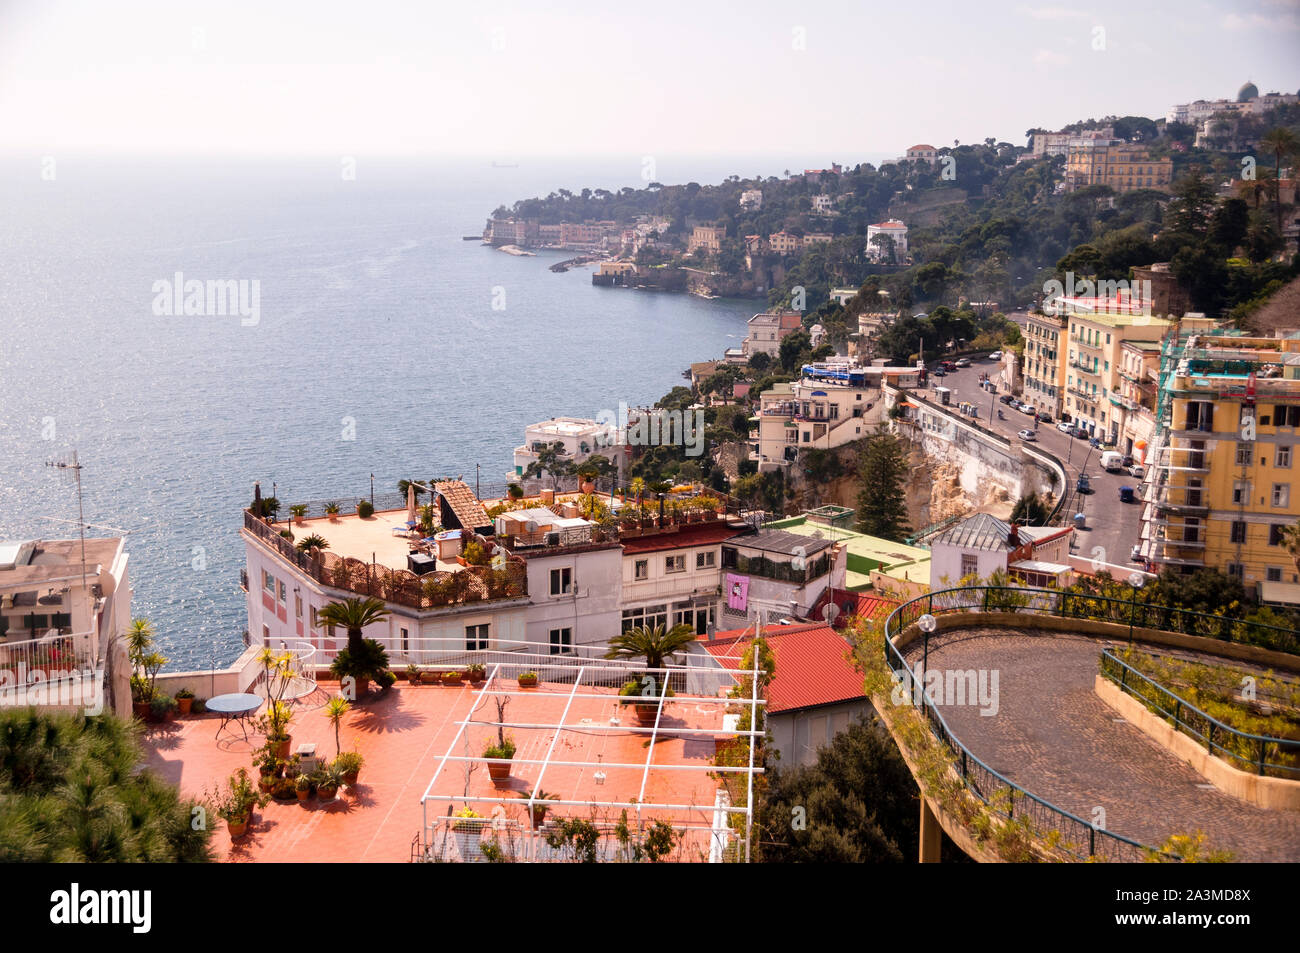 The Gulf of Naples and winding road in Naples, Italy. Stock Photo